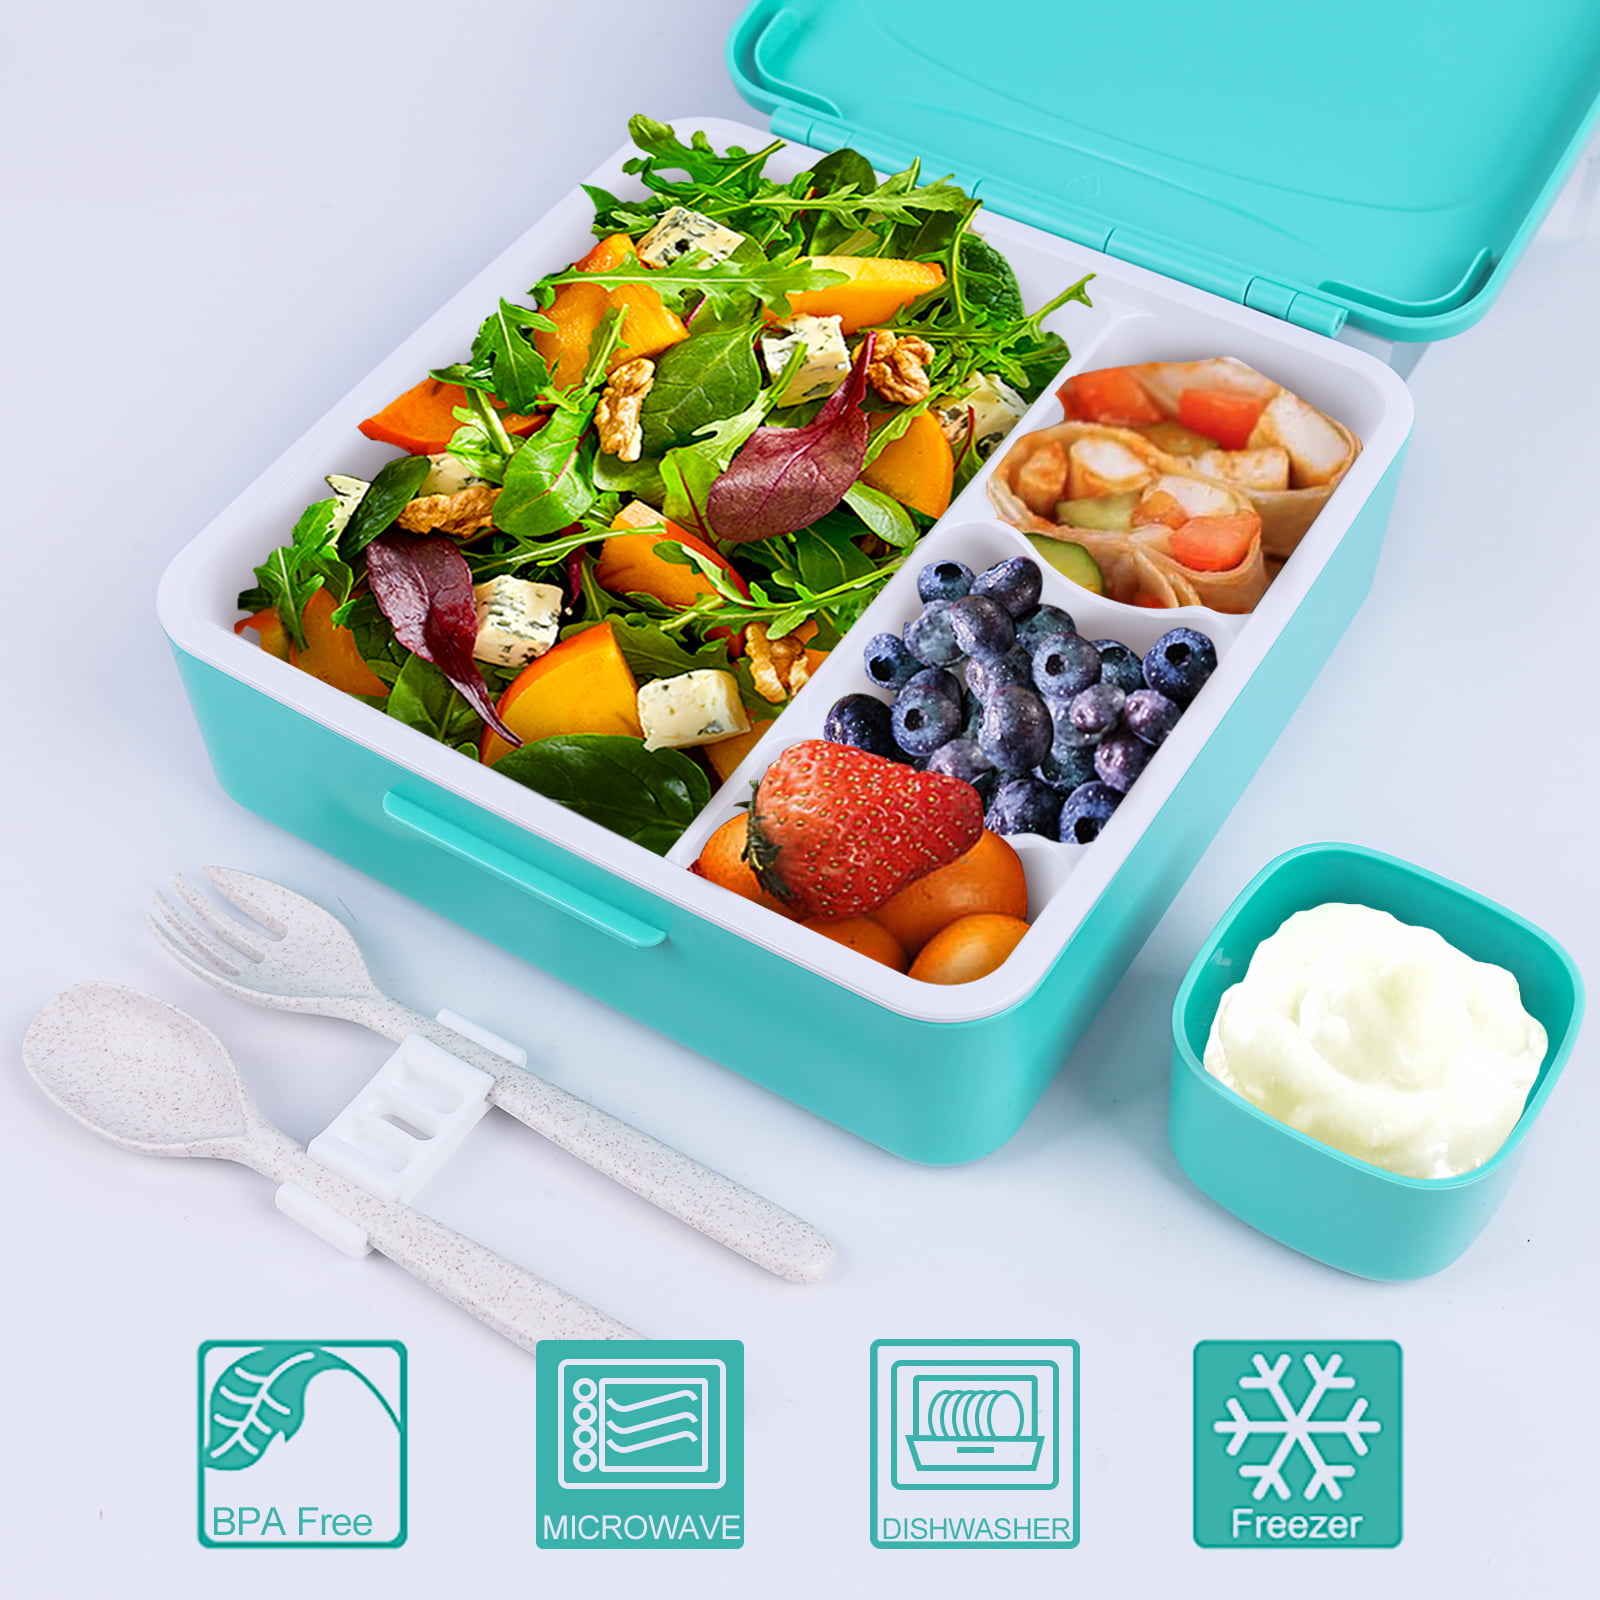 Toolzia Lunch Box Bento Lunch Box for Kids and Adults BPA-Free Microwavable